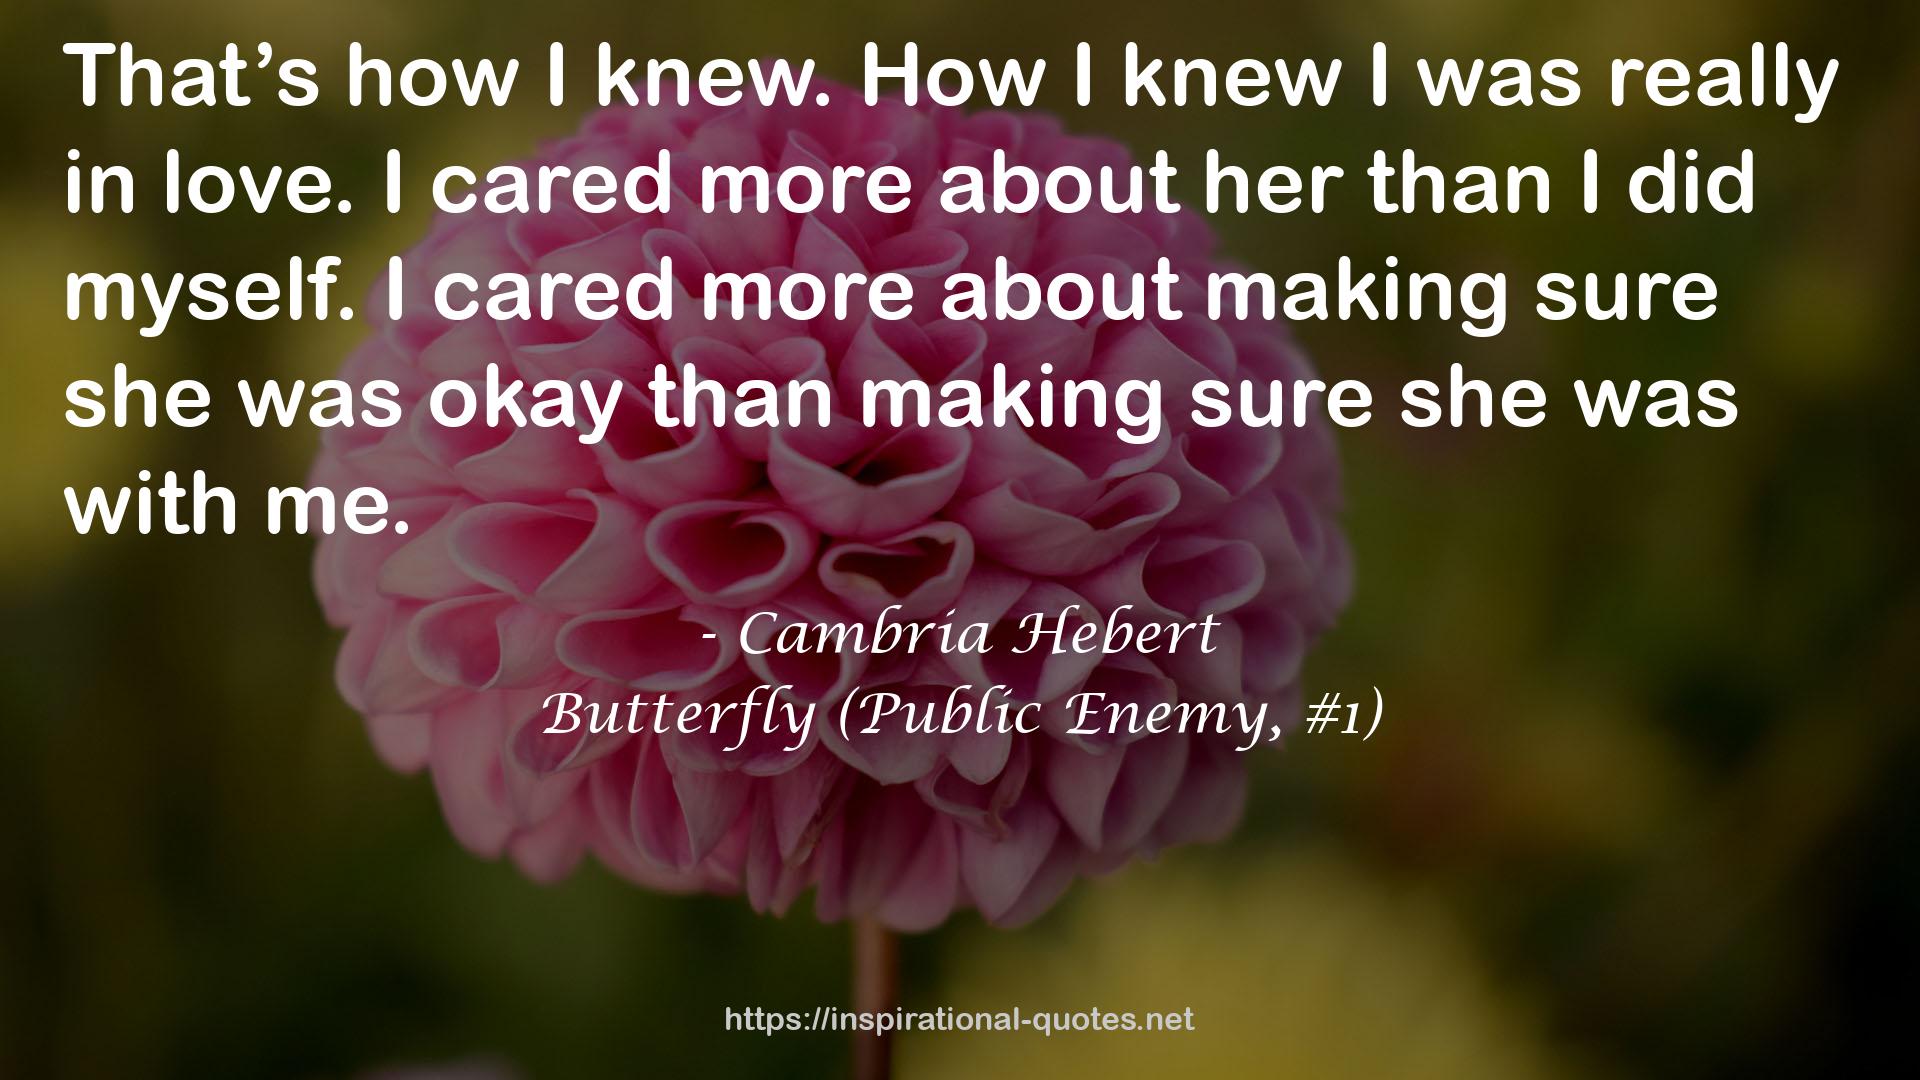 Butterfly (Public Enemy, #1) QUOTES